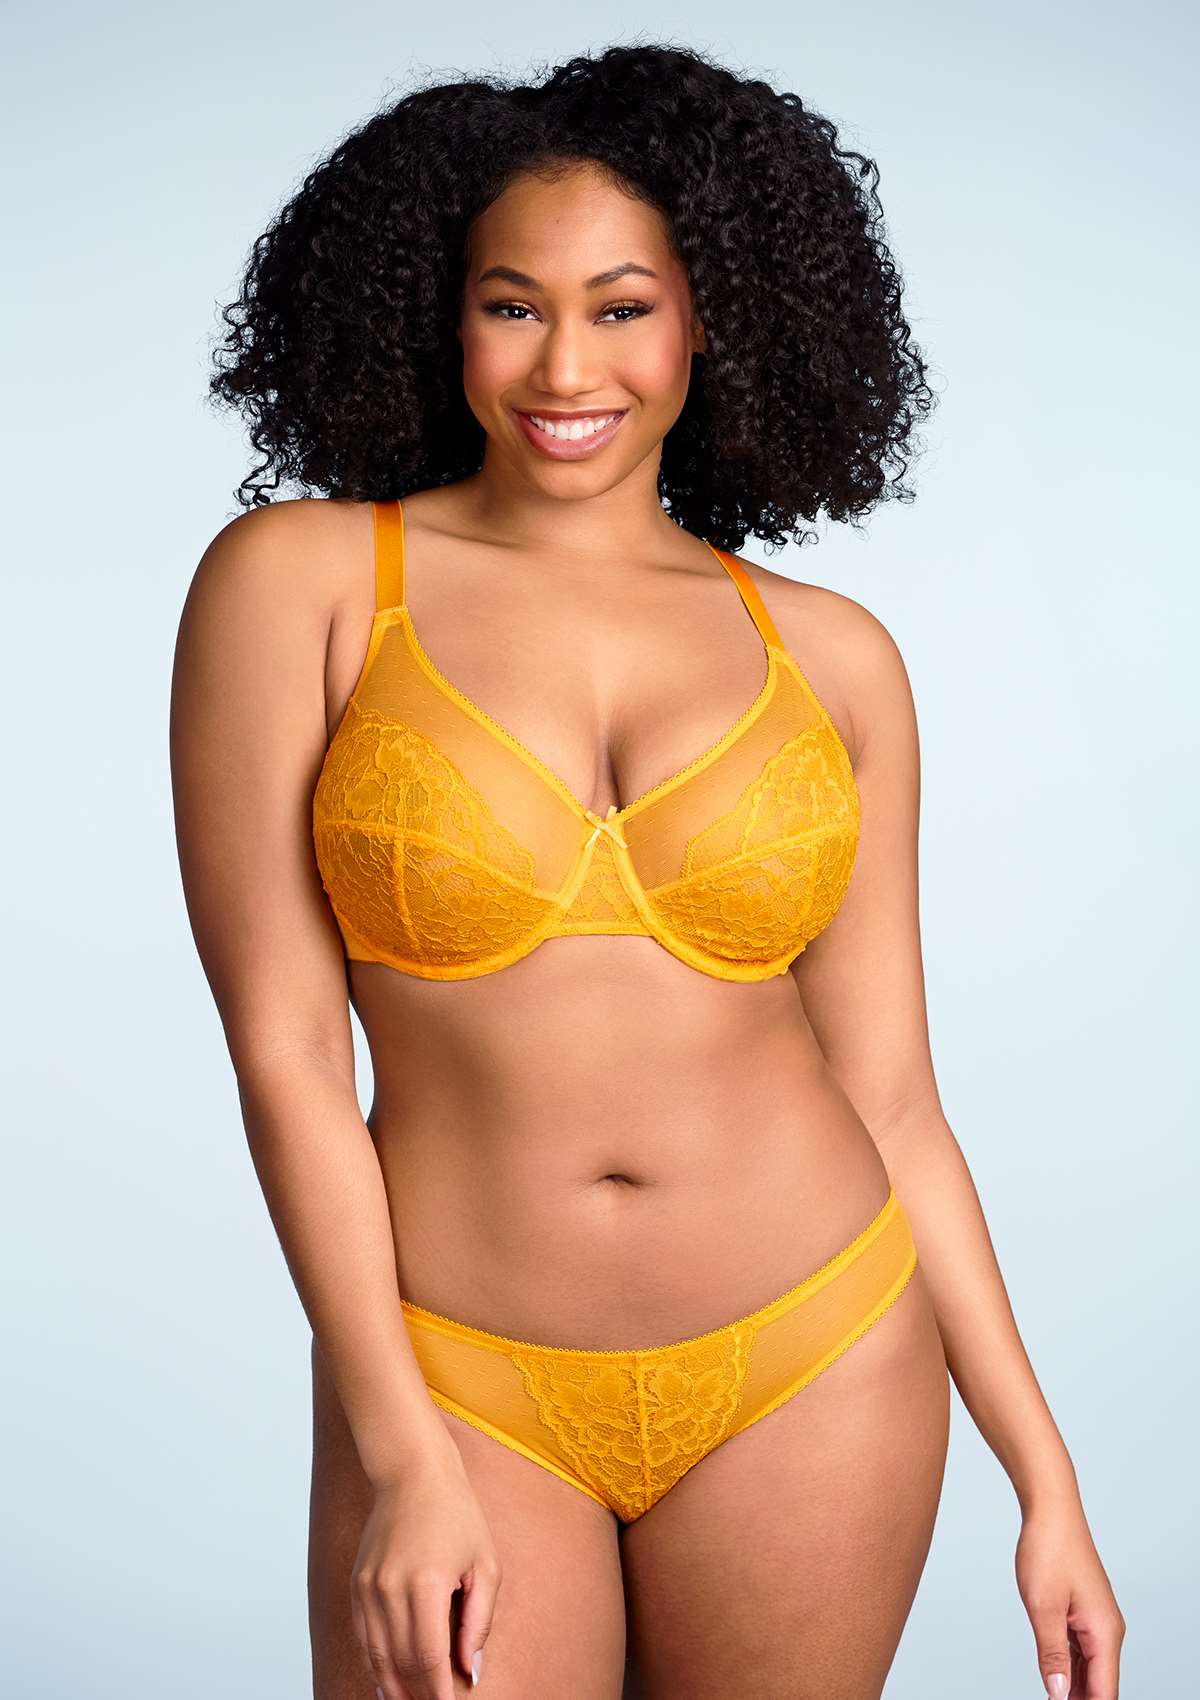 HSIA Enchante Bra And Panty Sets: Unpadded Bra With Back Support - Cadmium Yellow / 34 / C